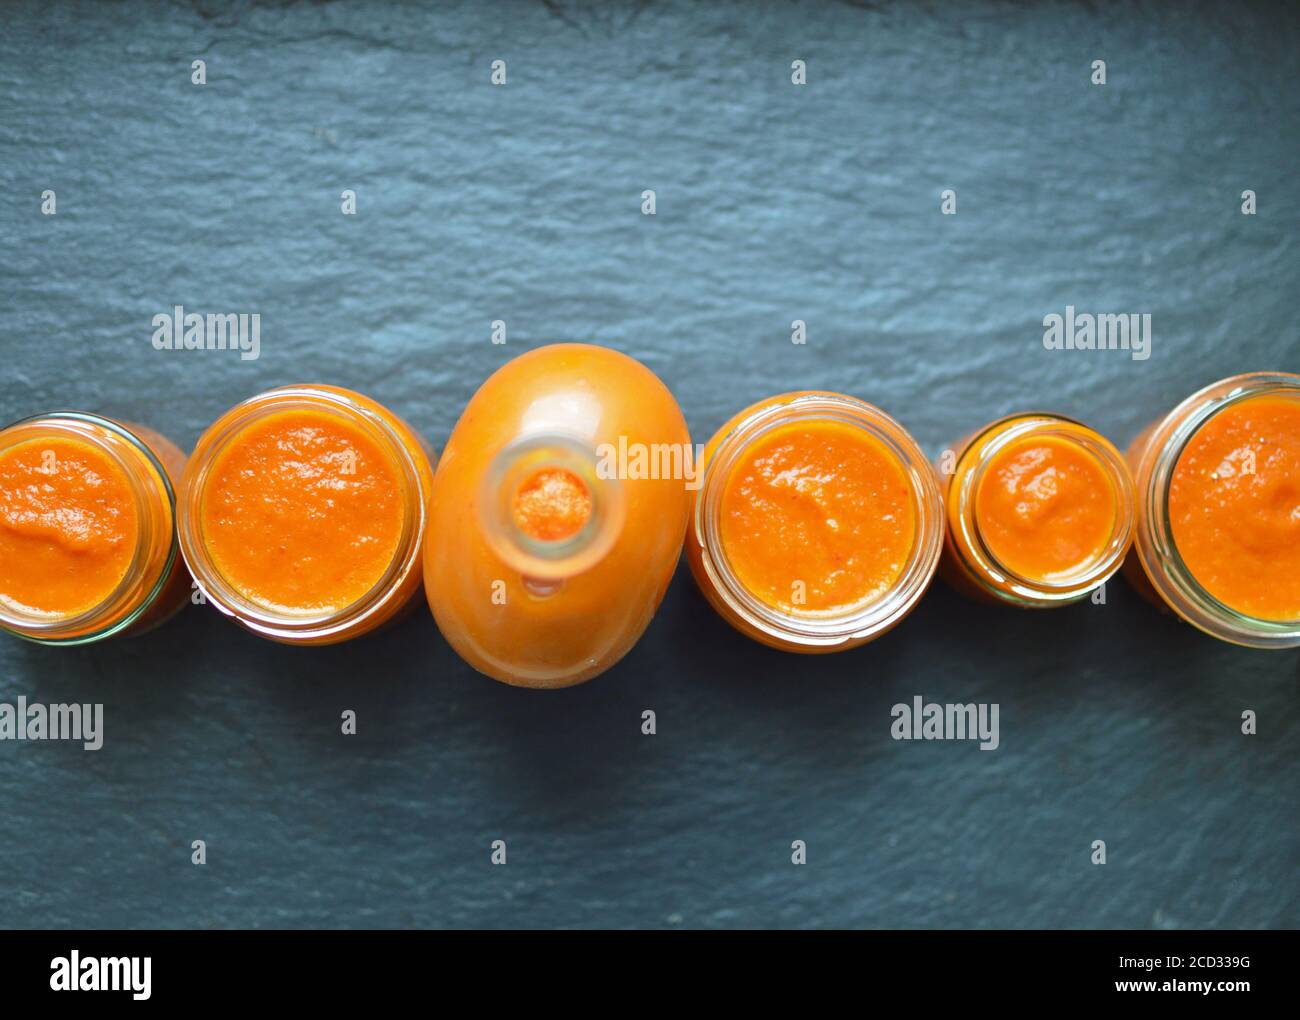 Top view of jars with chili sauce Stock Photo